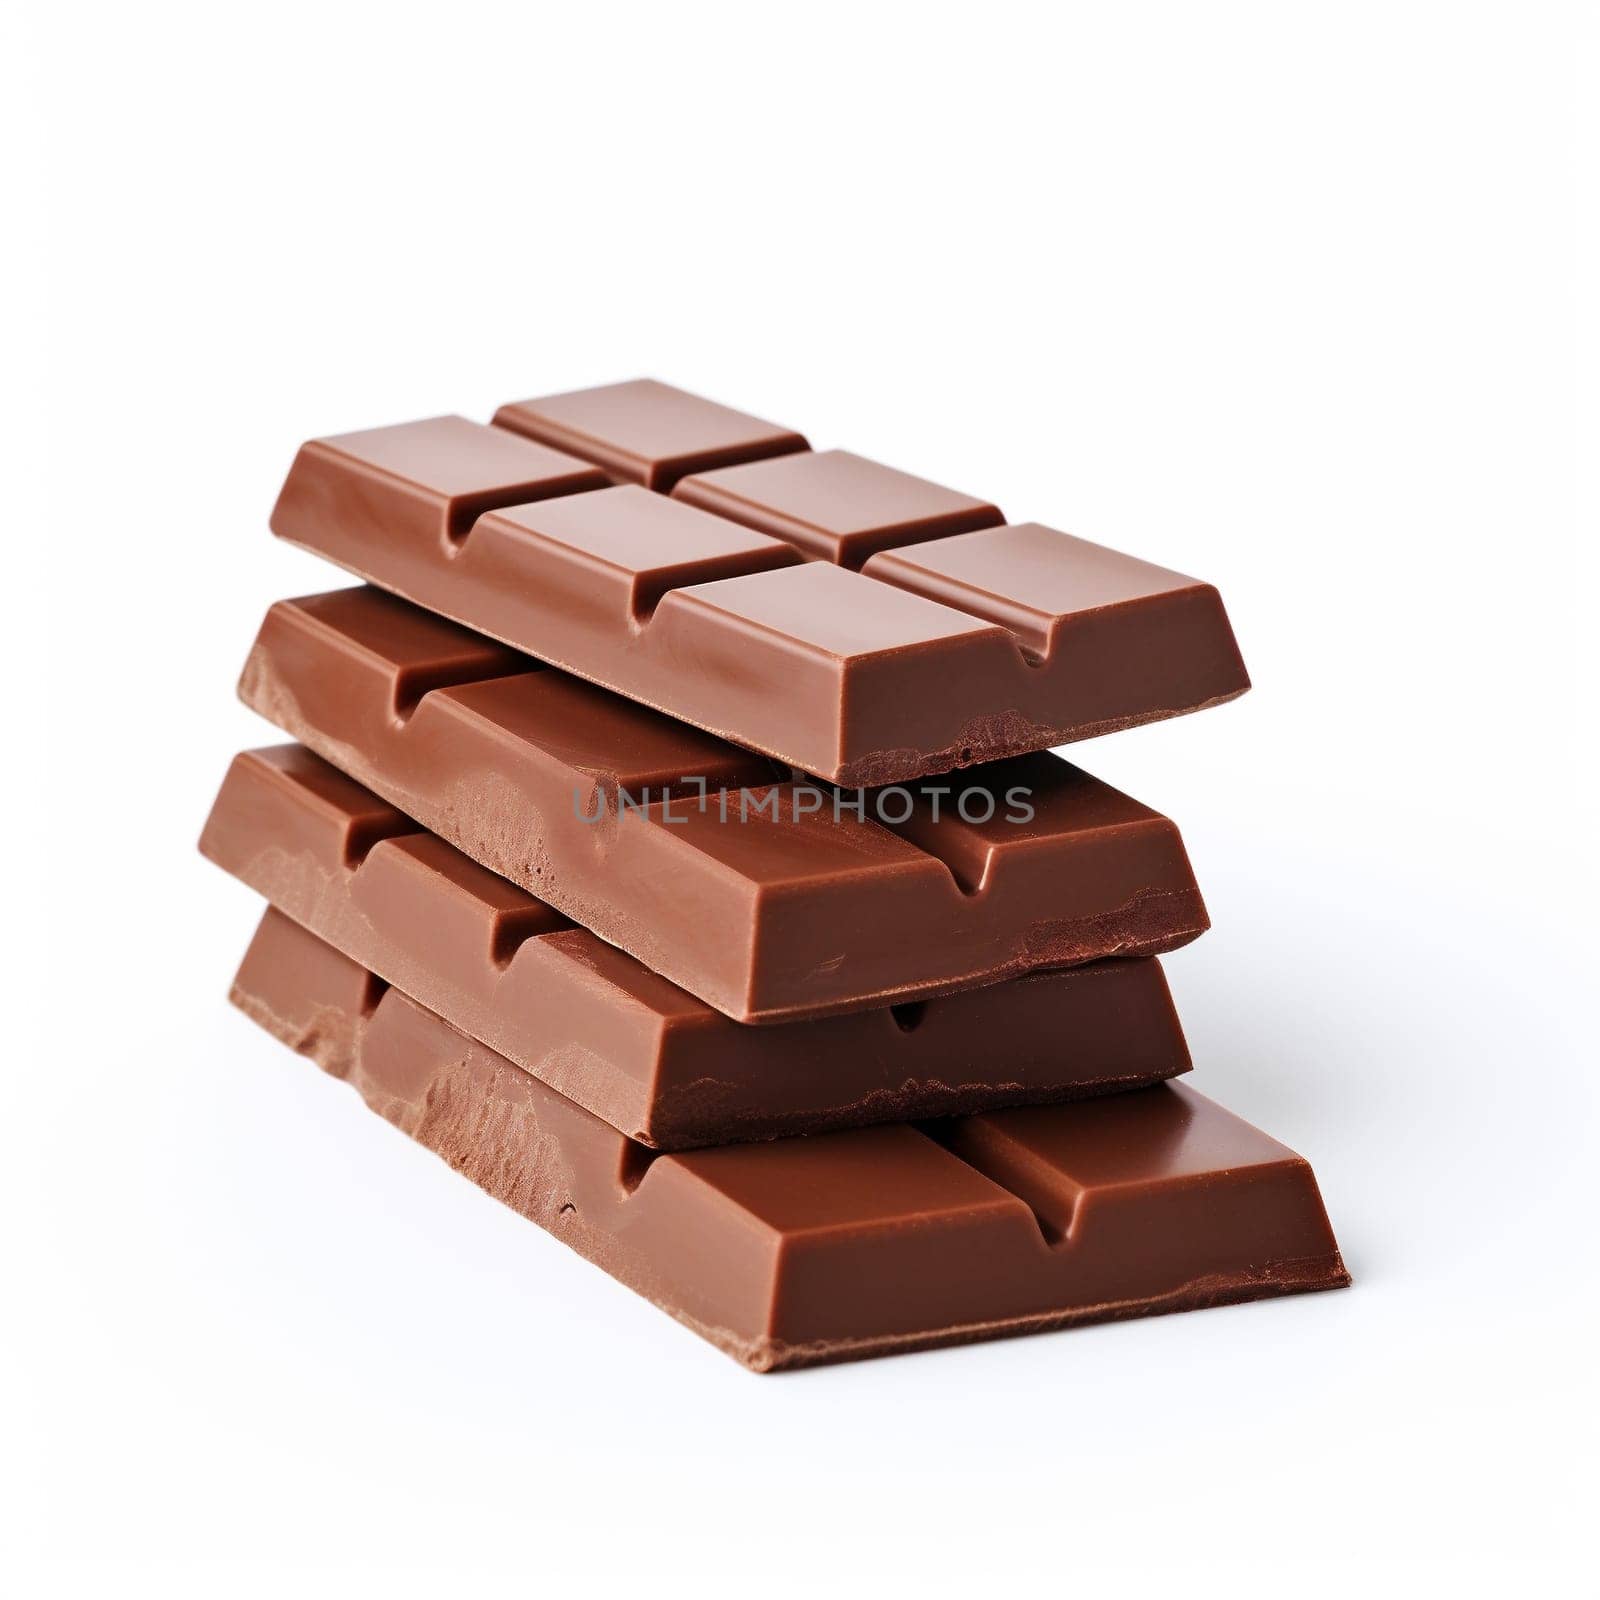 Milk Chocolate Bars Isolated on White Background. Top View.